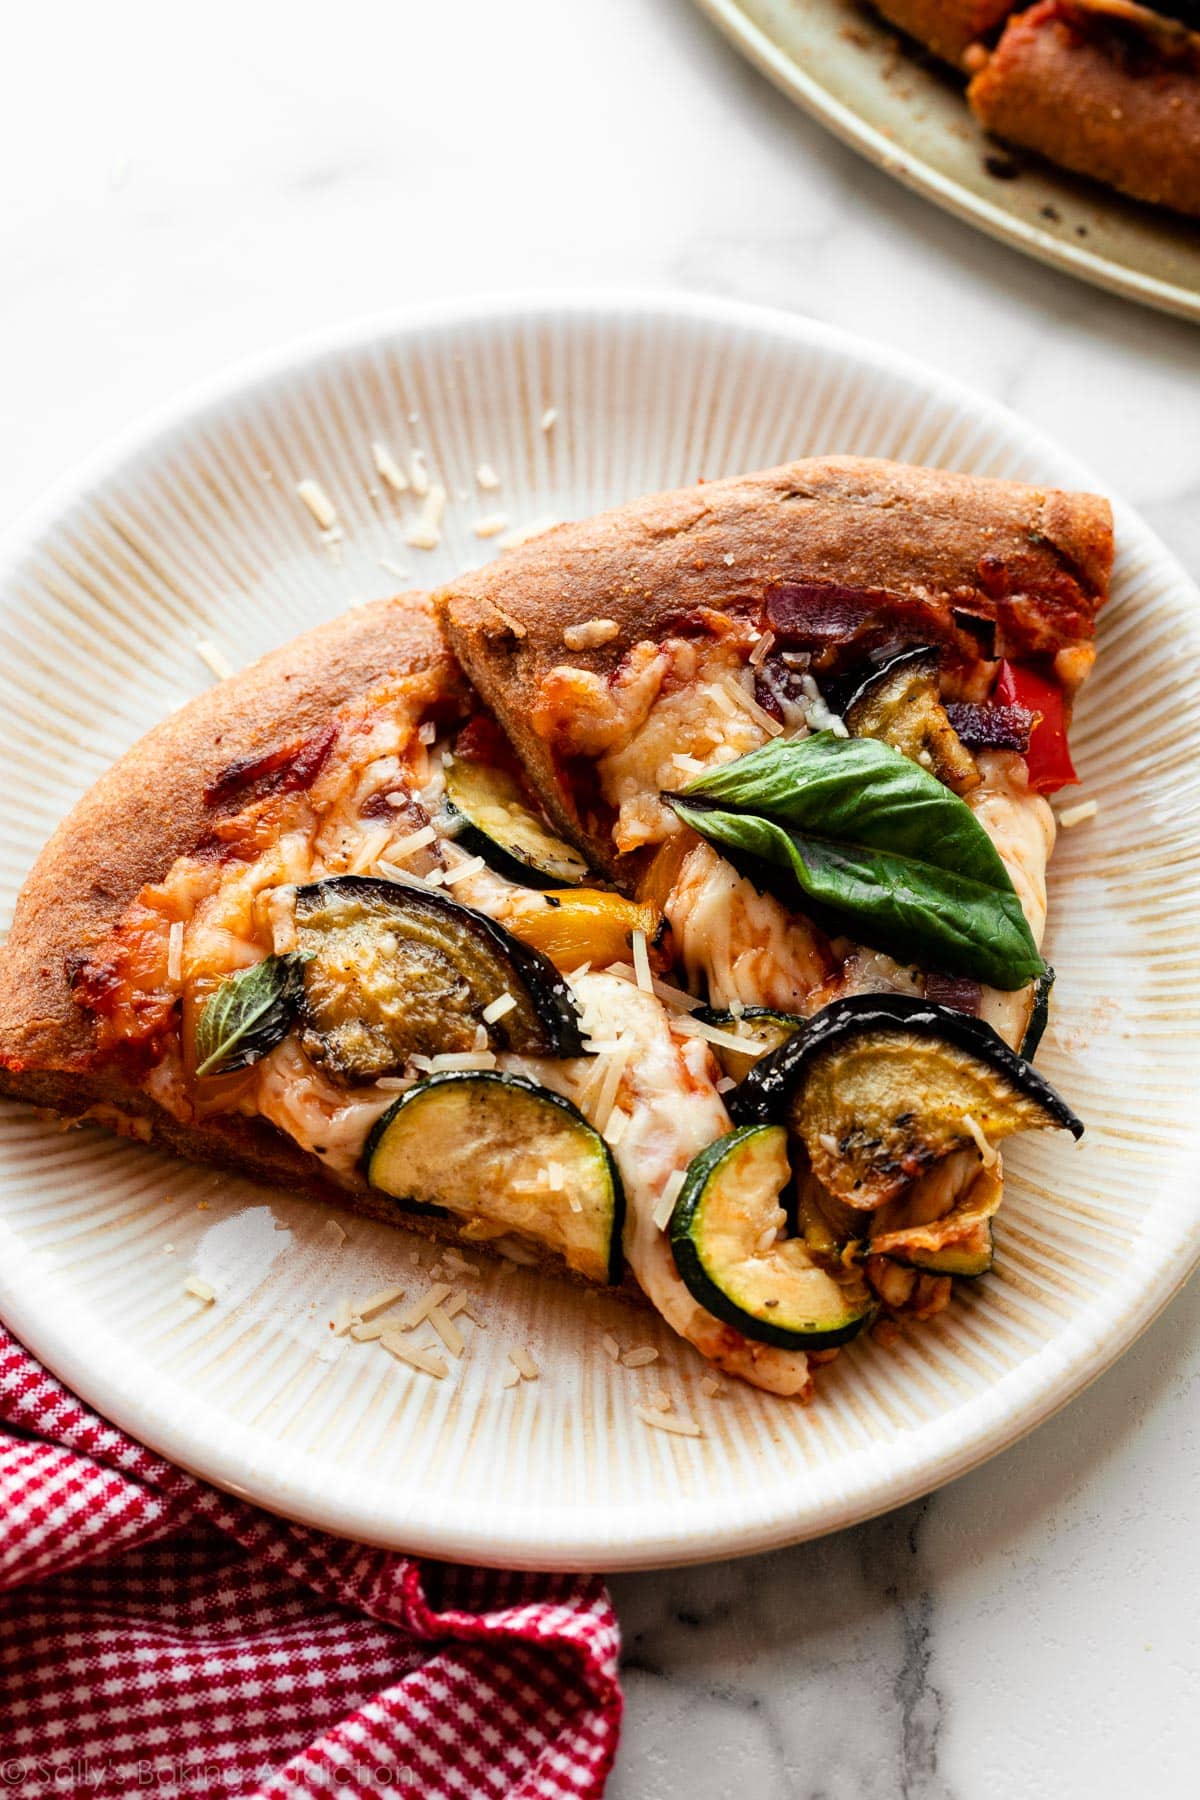 roasted vegetable whole wheat pizza slices